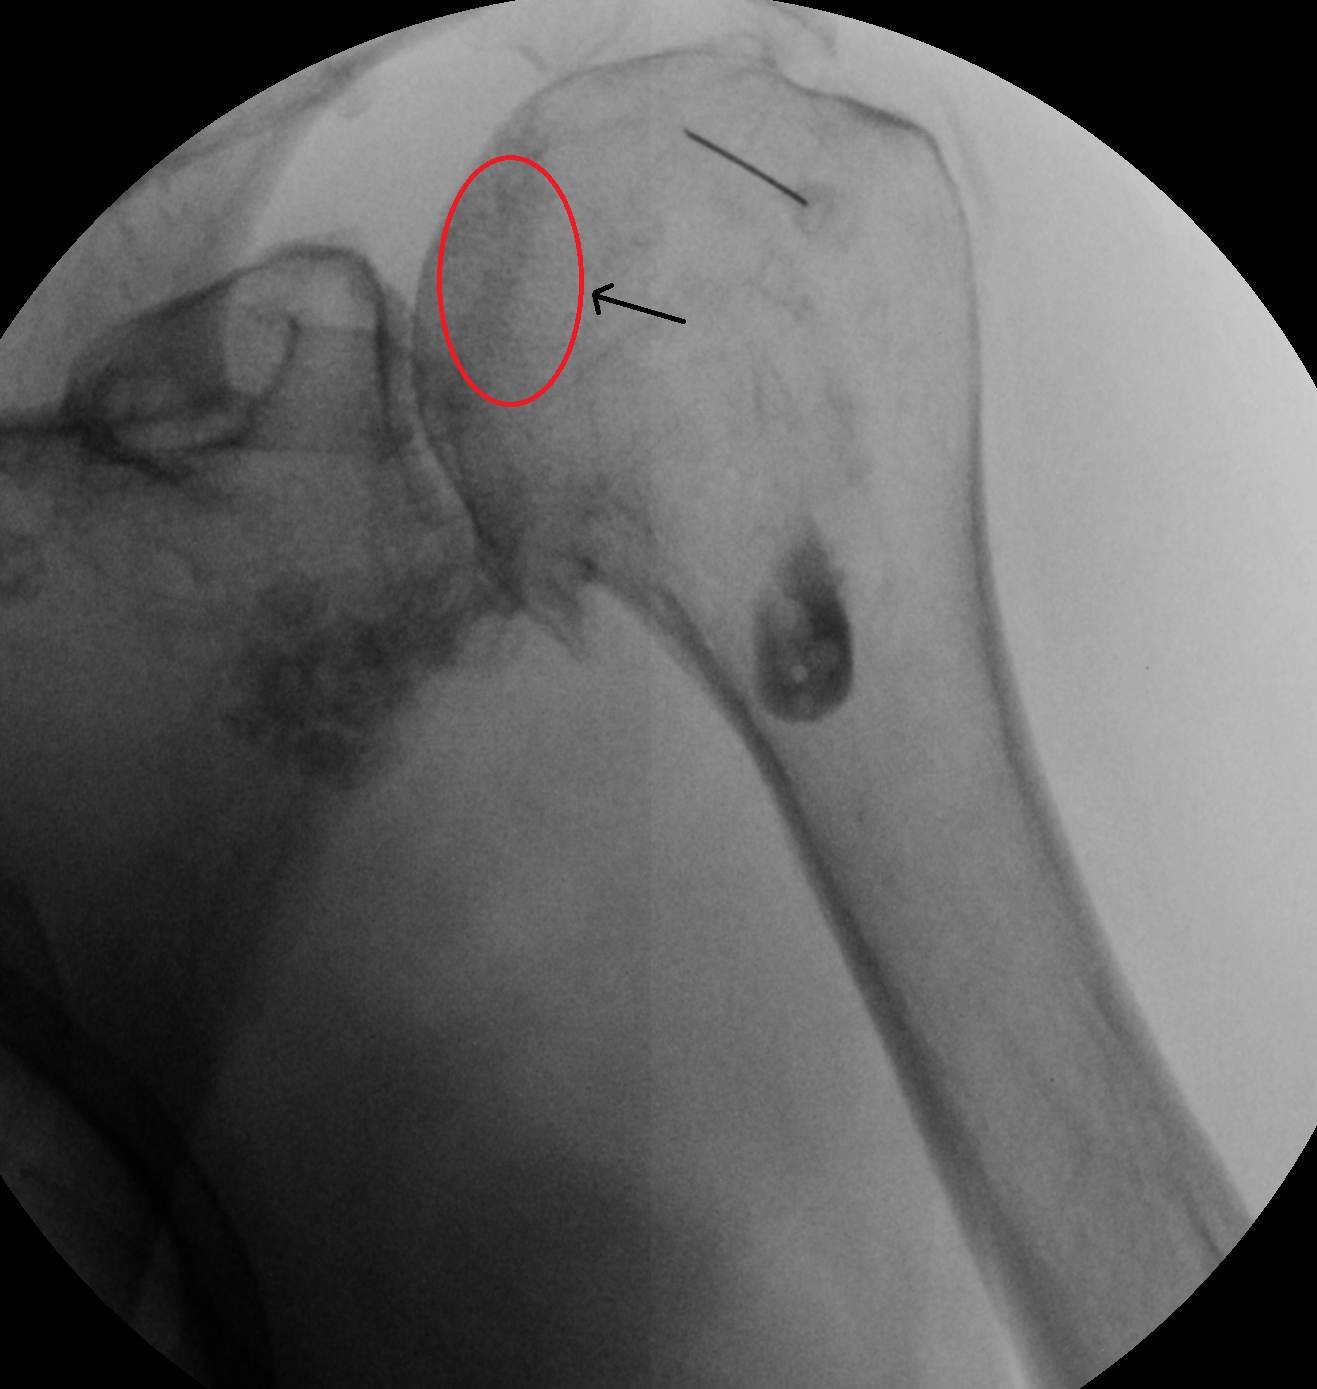 A single fluoroscopic image demonstrates a malpositioned needle within the superior aspect of the humeral head